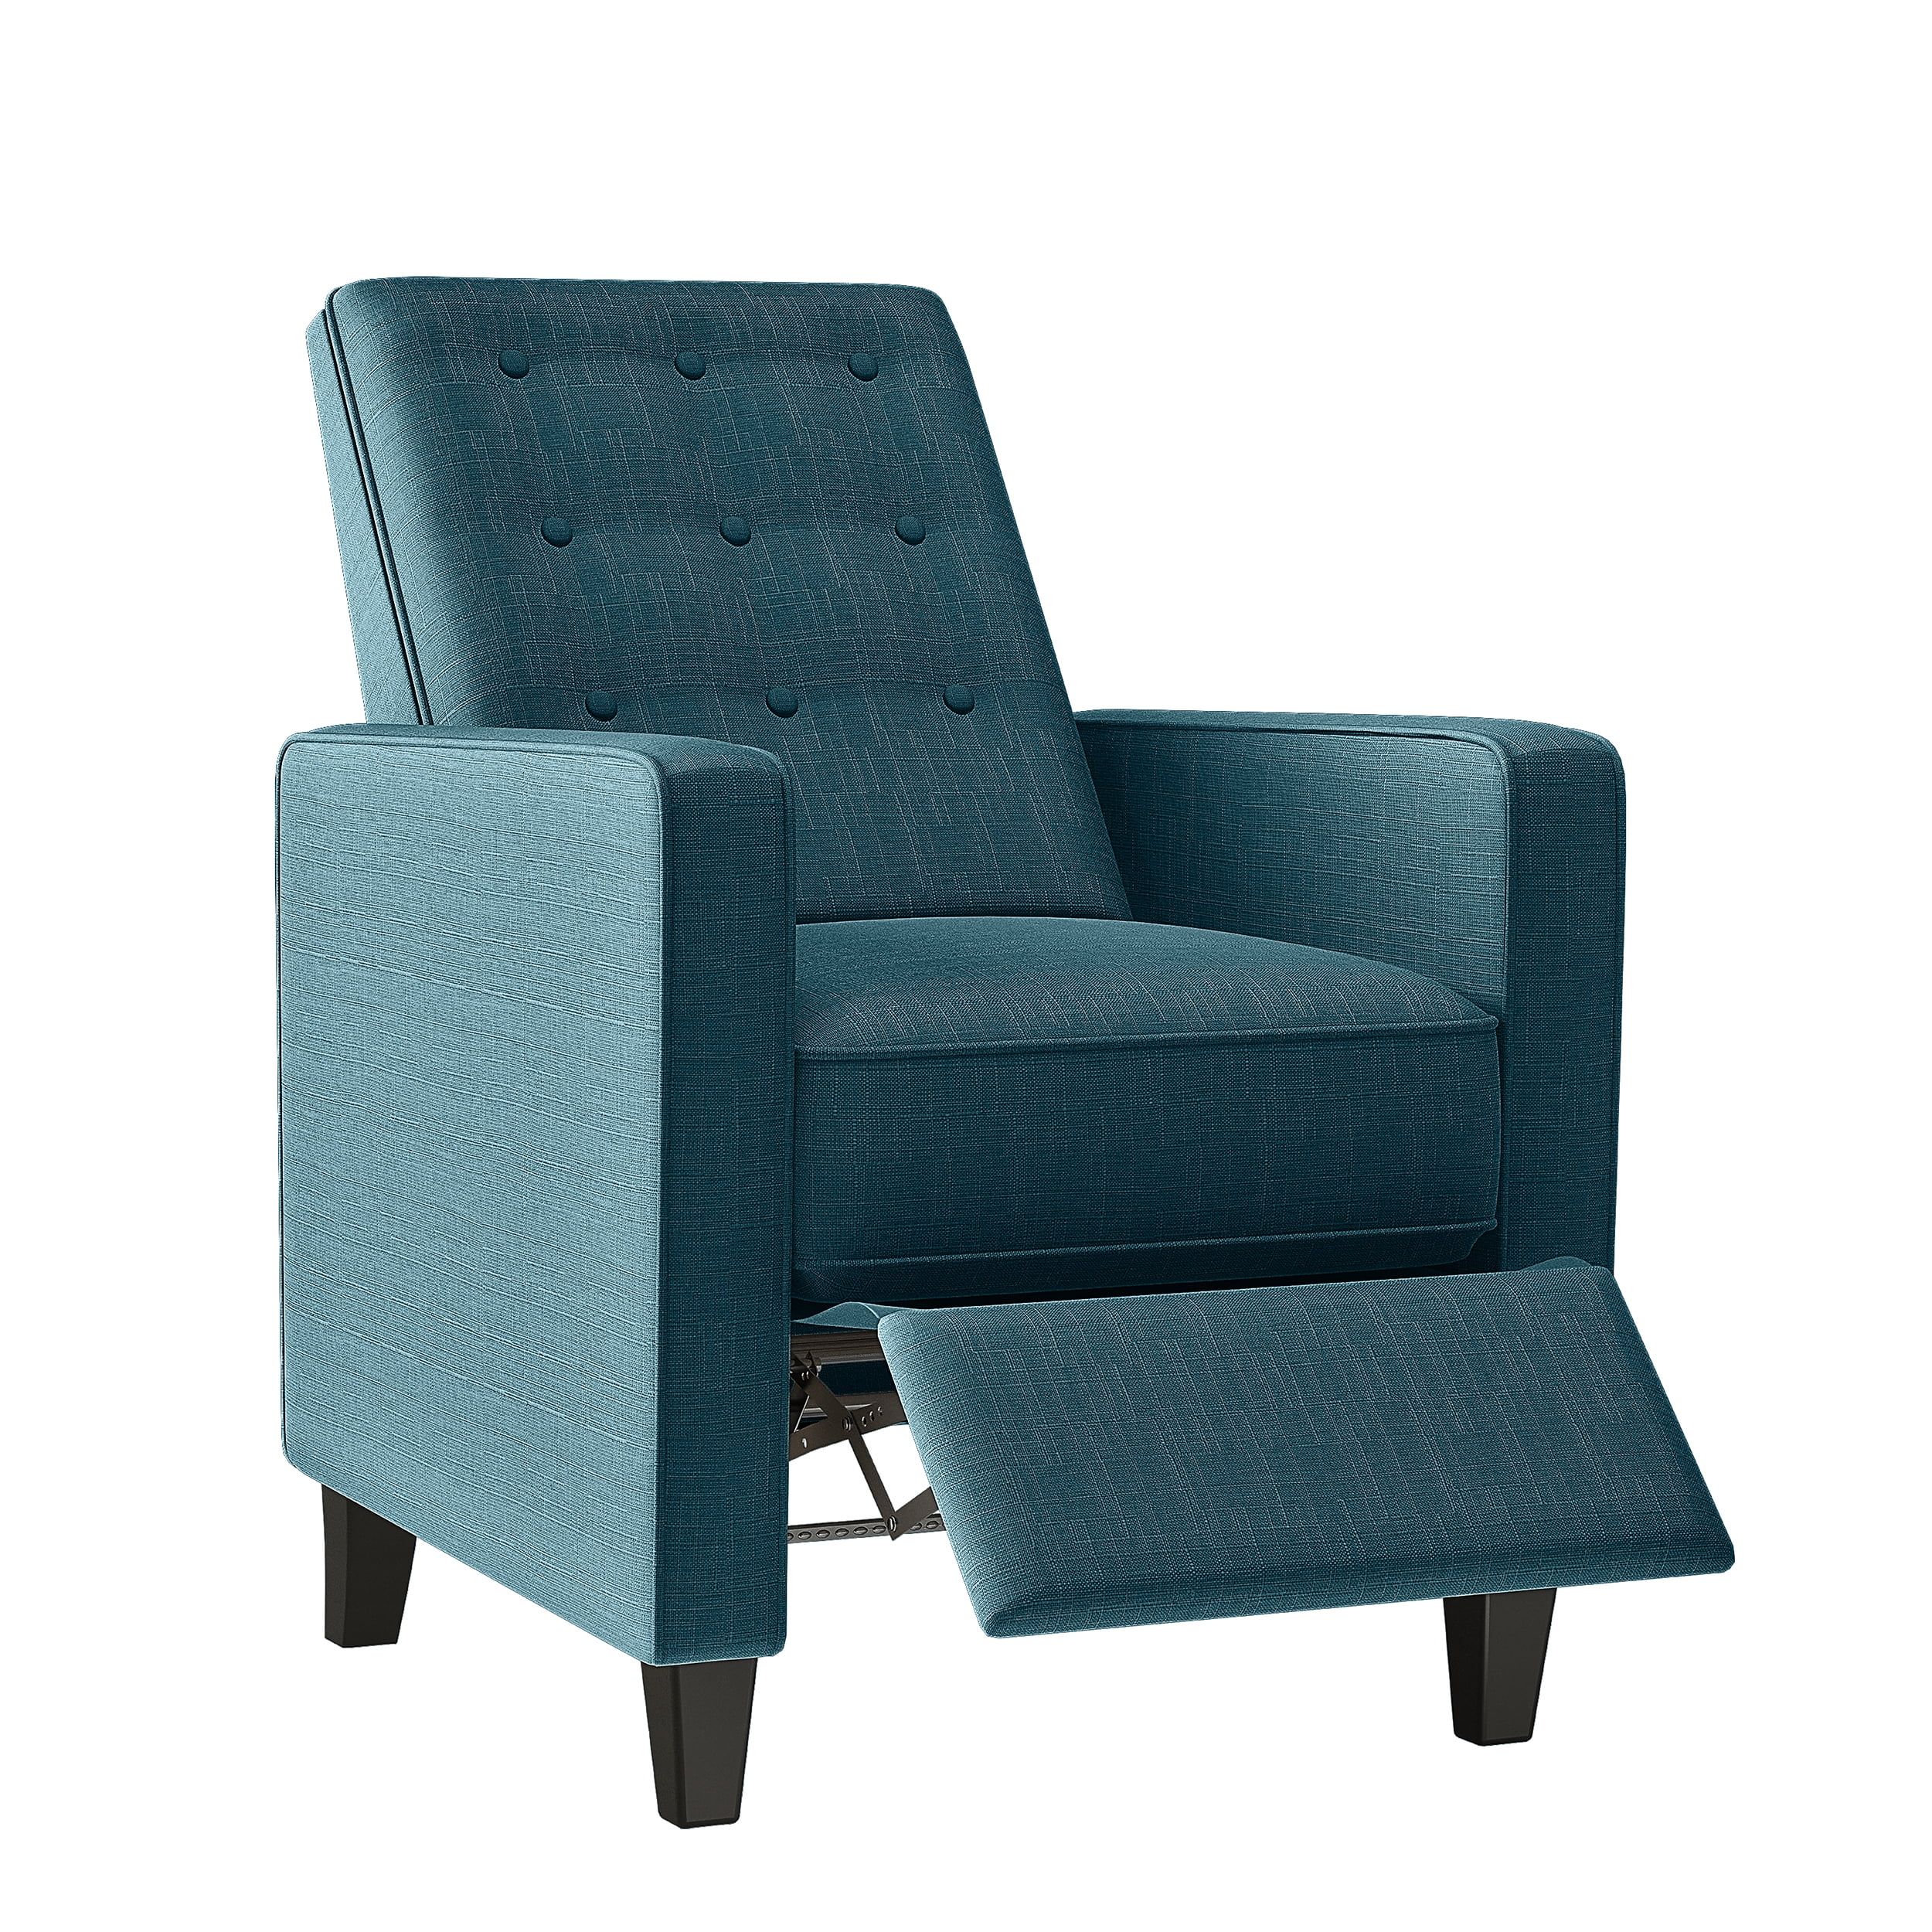 Homesvale Van Pay Button Tufted Pushback Recliner, Caribbean Blue | Walmart (US)